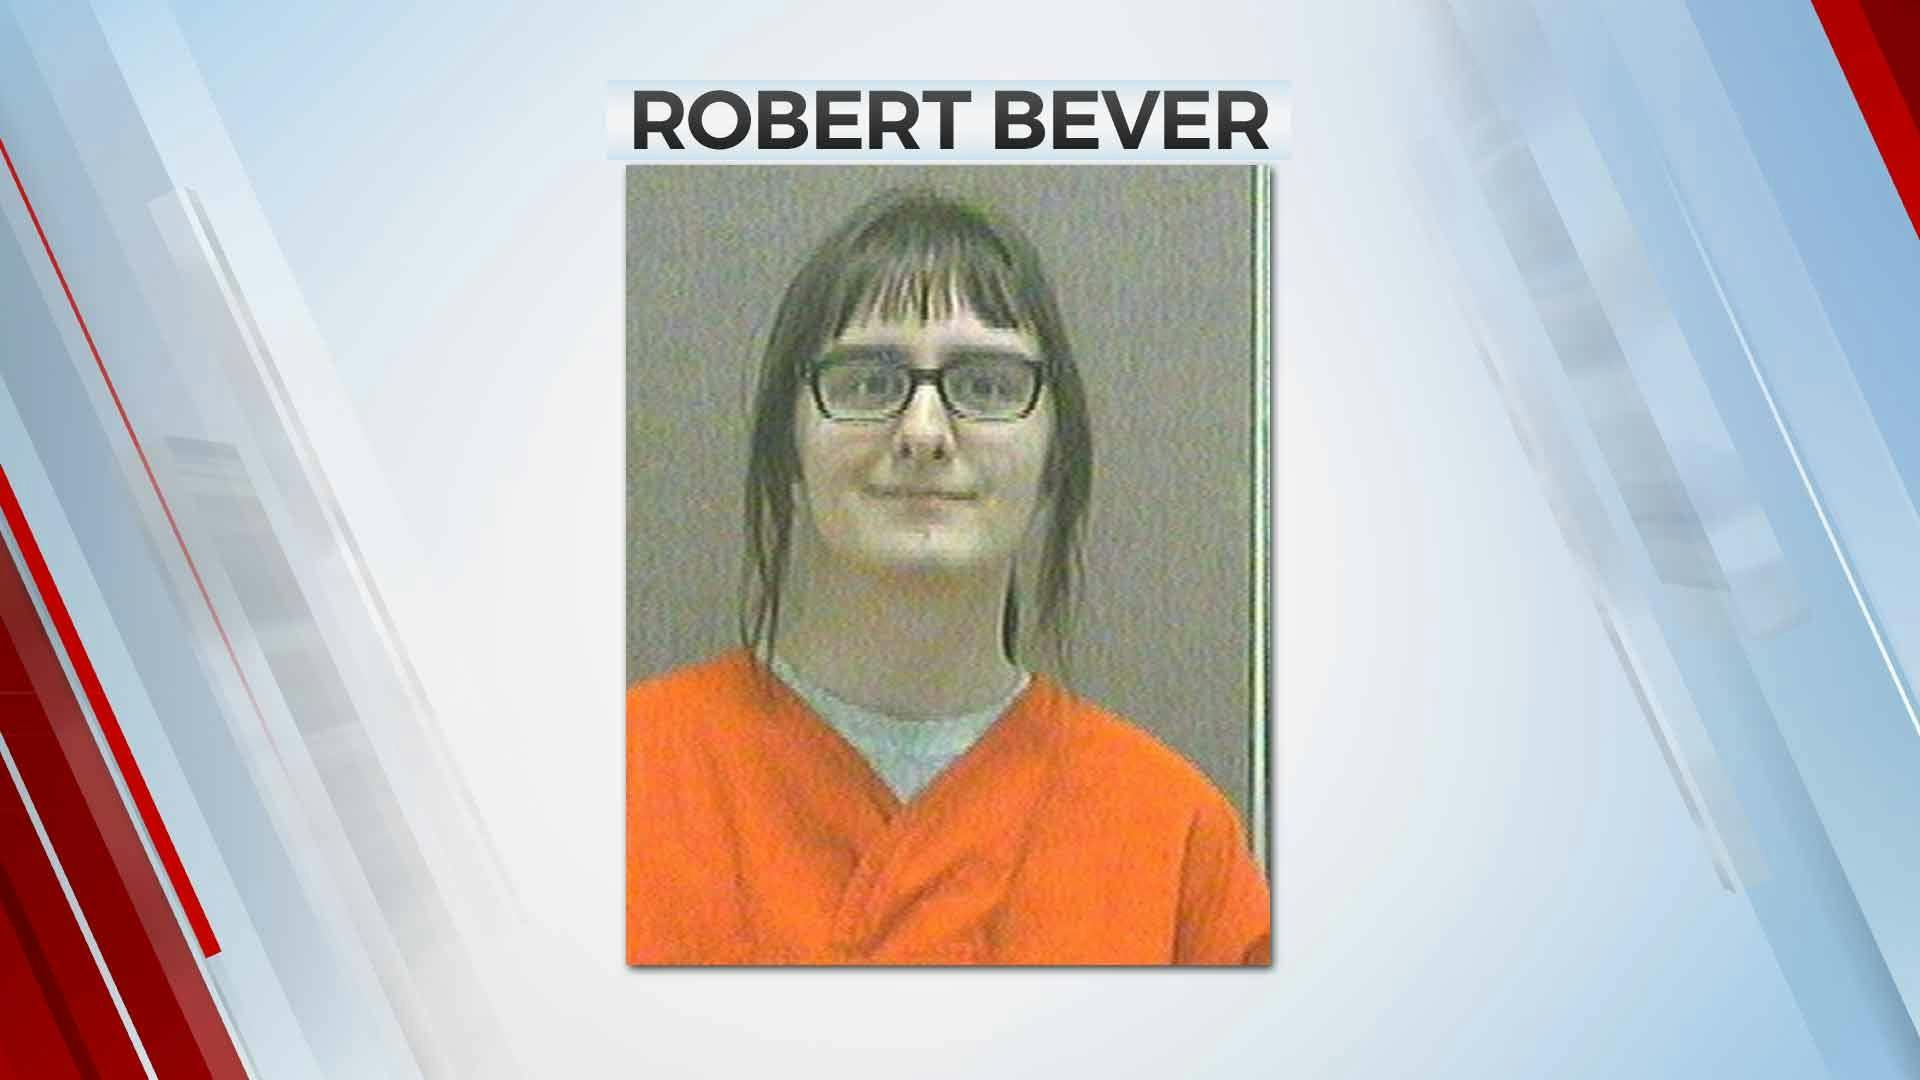 Robert Bever Tries To Attack Prison Staff With 'Sharpened Instrument